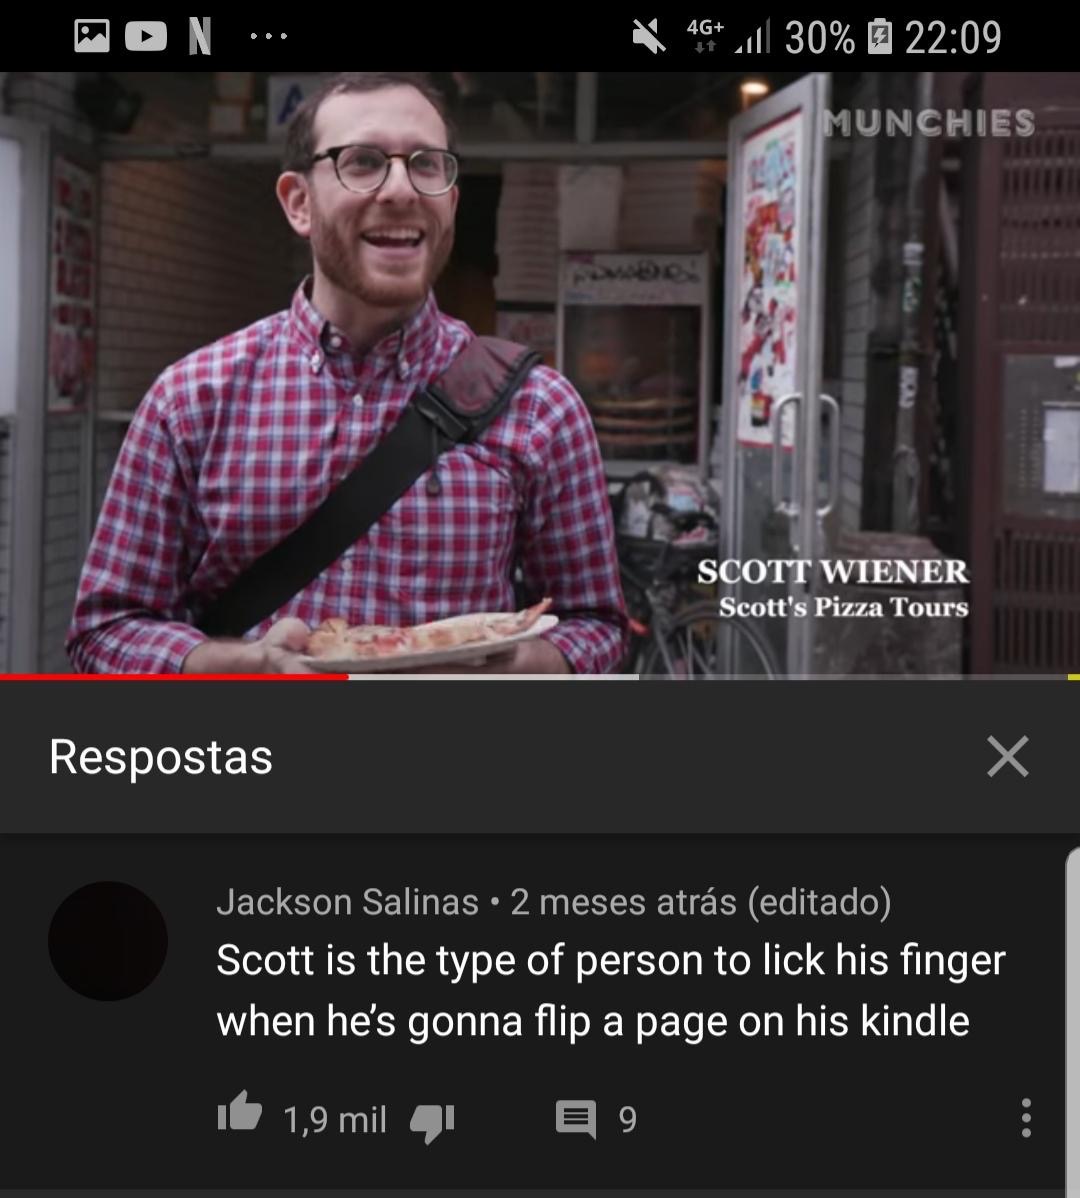 best roasts - screenshot - 4G 1 30% @ Munchies Scott Wiener Scott's Pizza Tours Respostas Jackson Salinas 2 meses atrs editado Scott is the type of person to lick his finger when he's gonna flip a page on his kindle it 1,9 mil 9